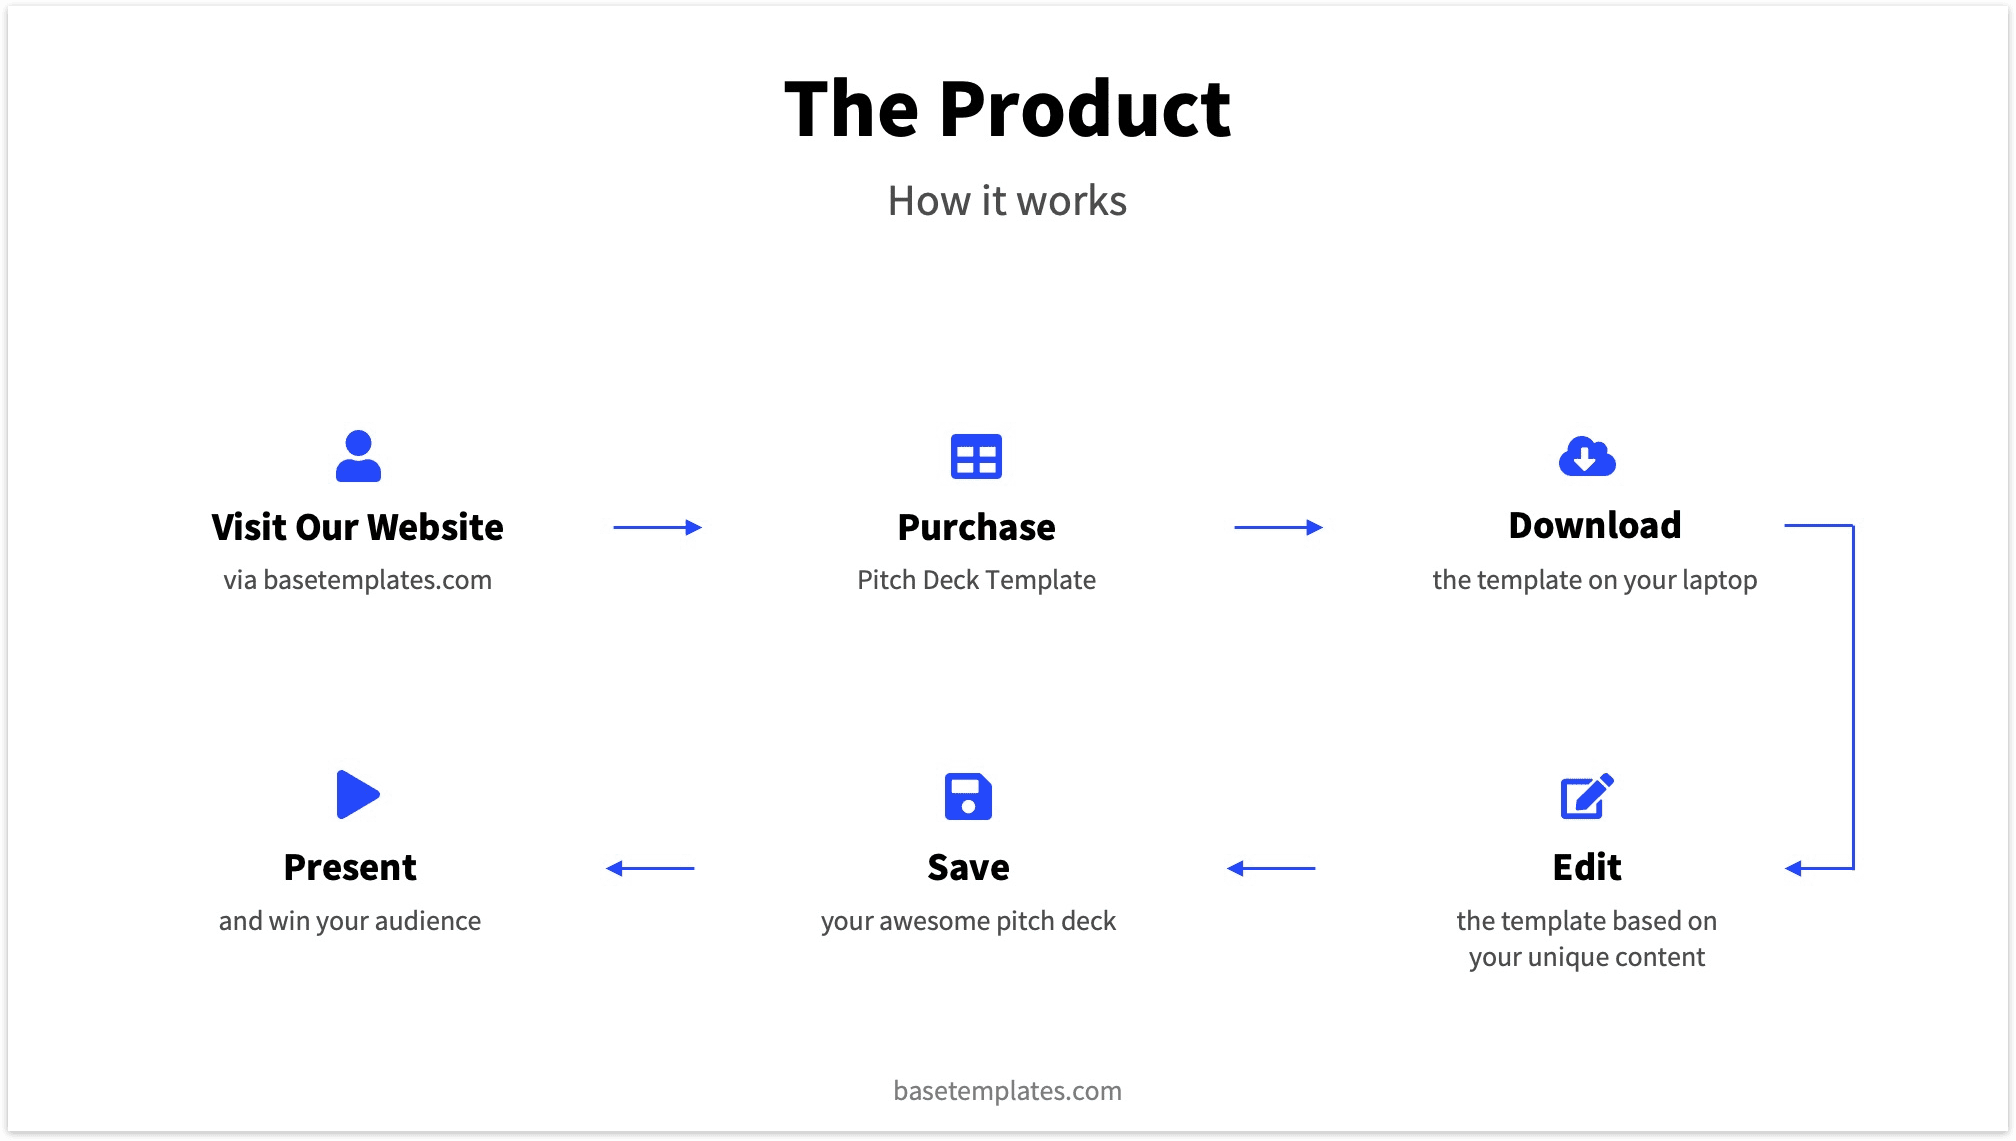 Pitch Deck Template Viewer: Product - BaseTemplates